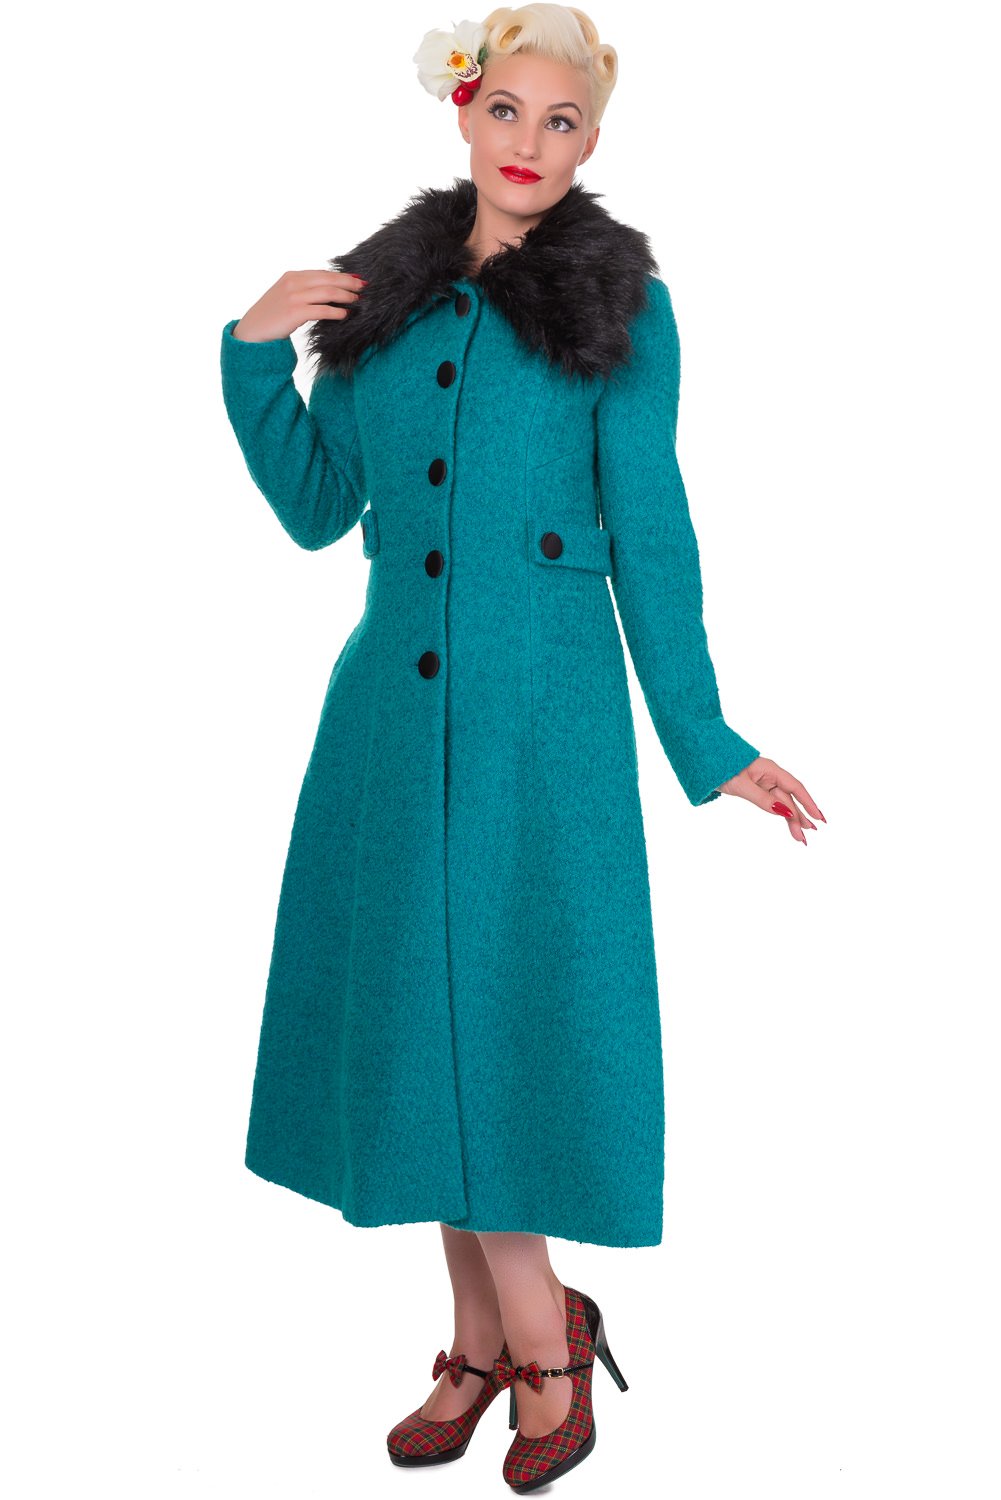 Banned Simple Game 40's 50's Emerald Coat